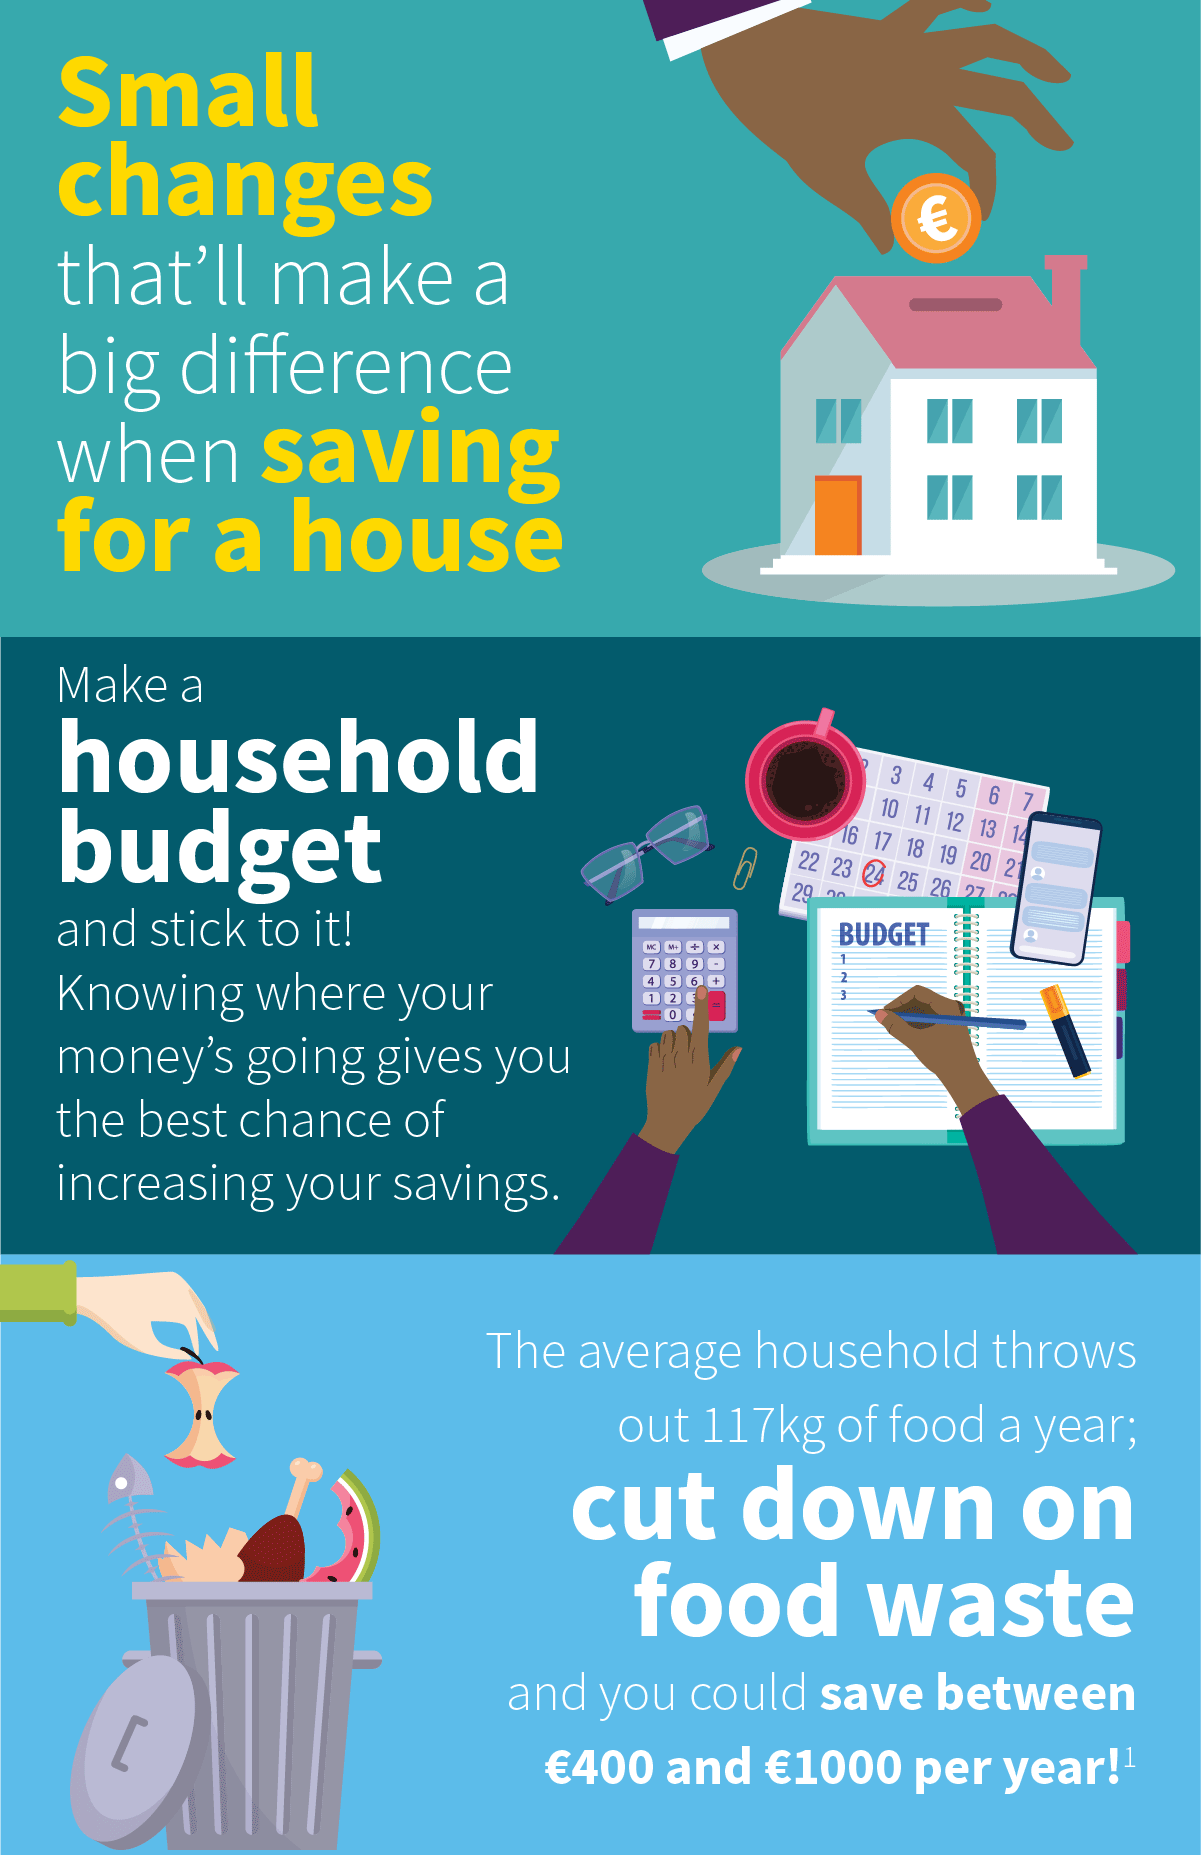 Small changes to help save for a home - Aviva Ireland